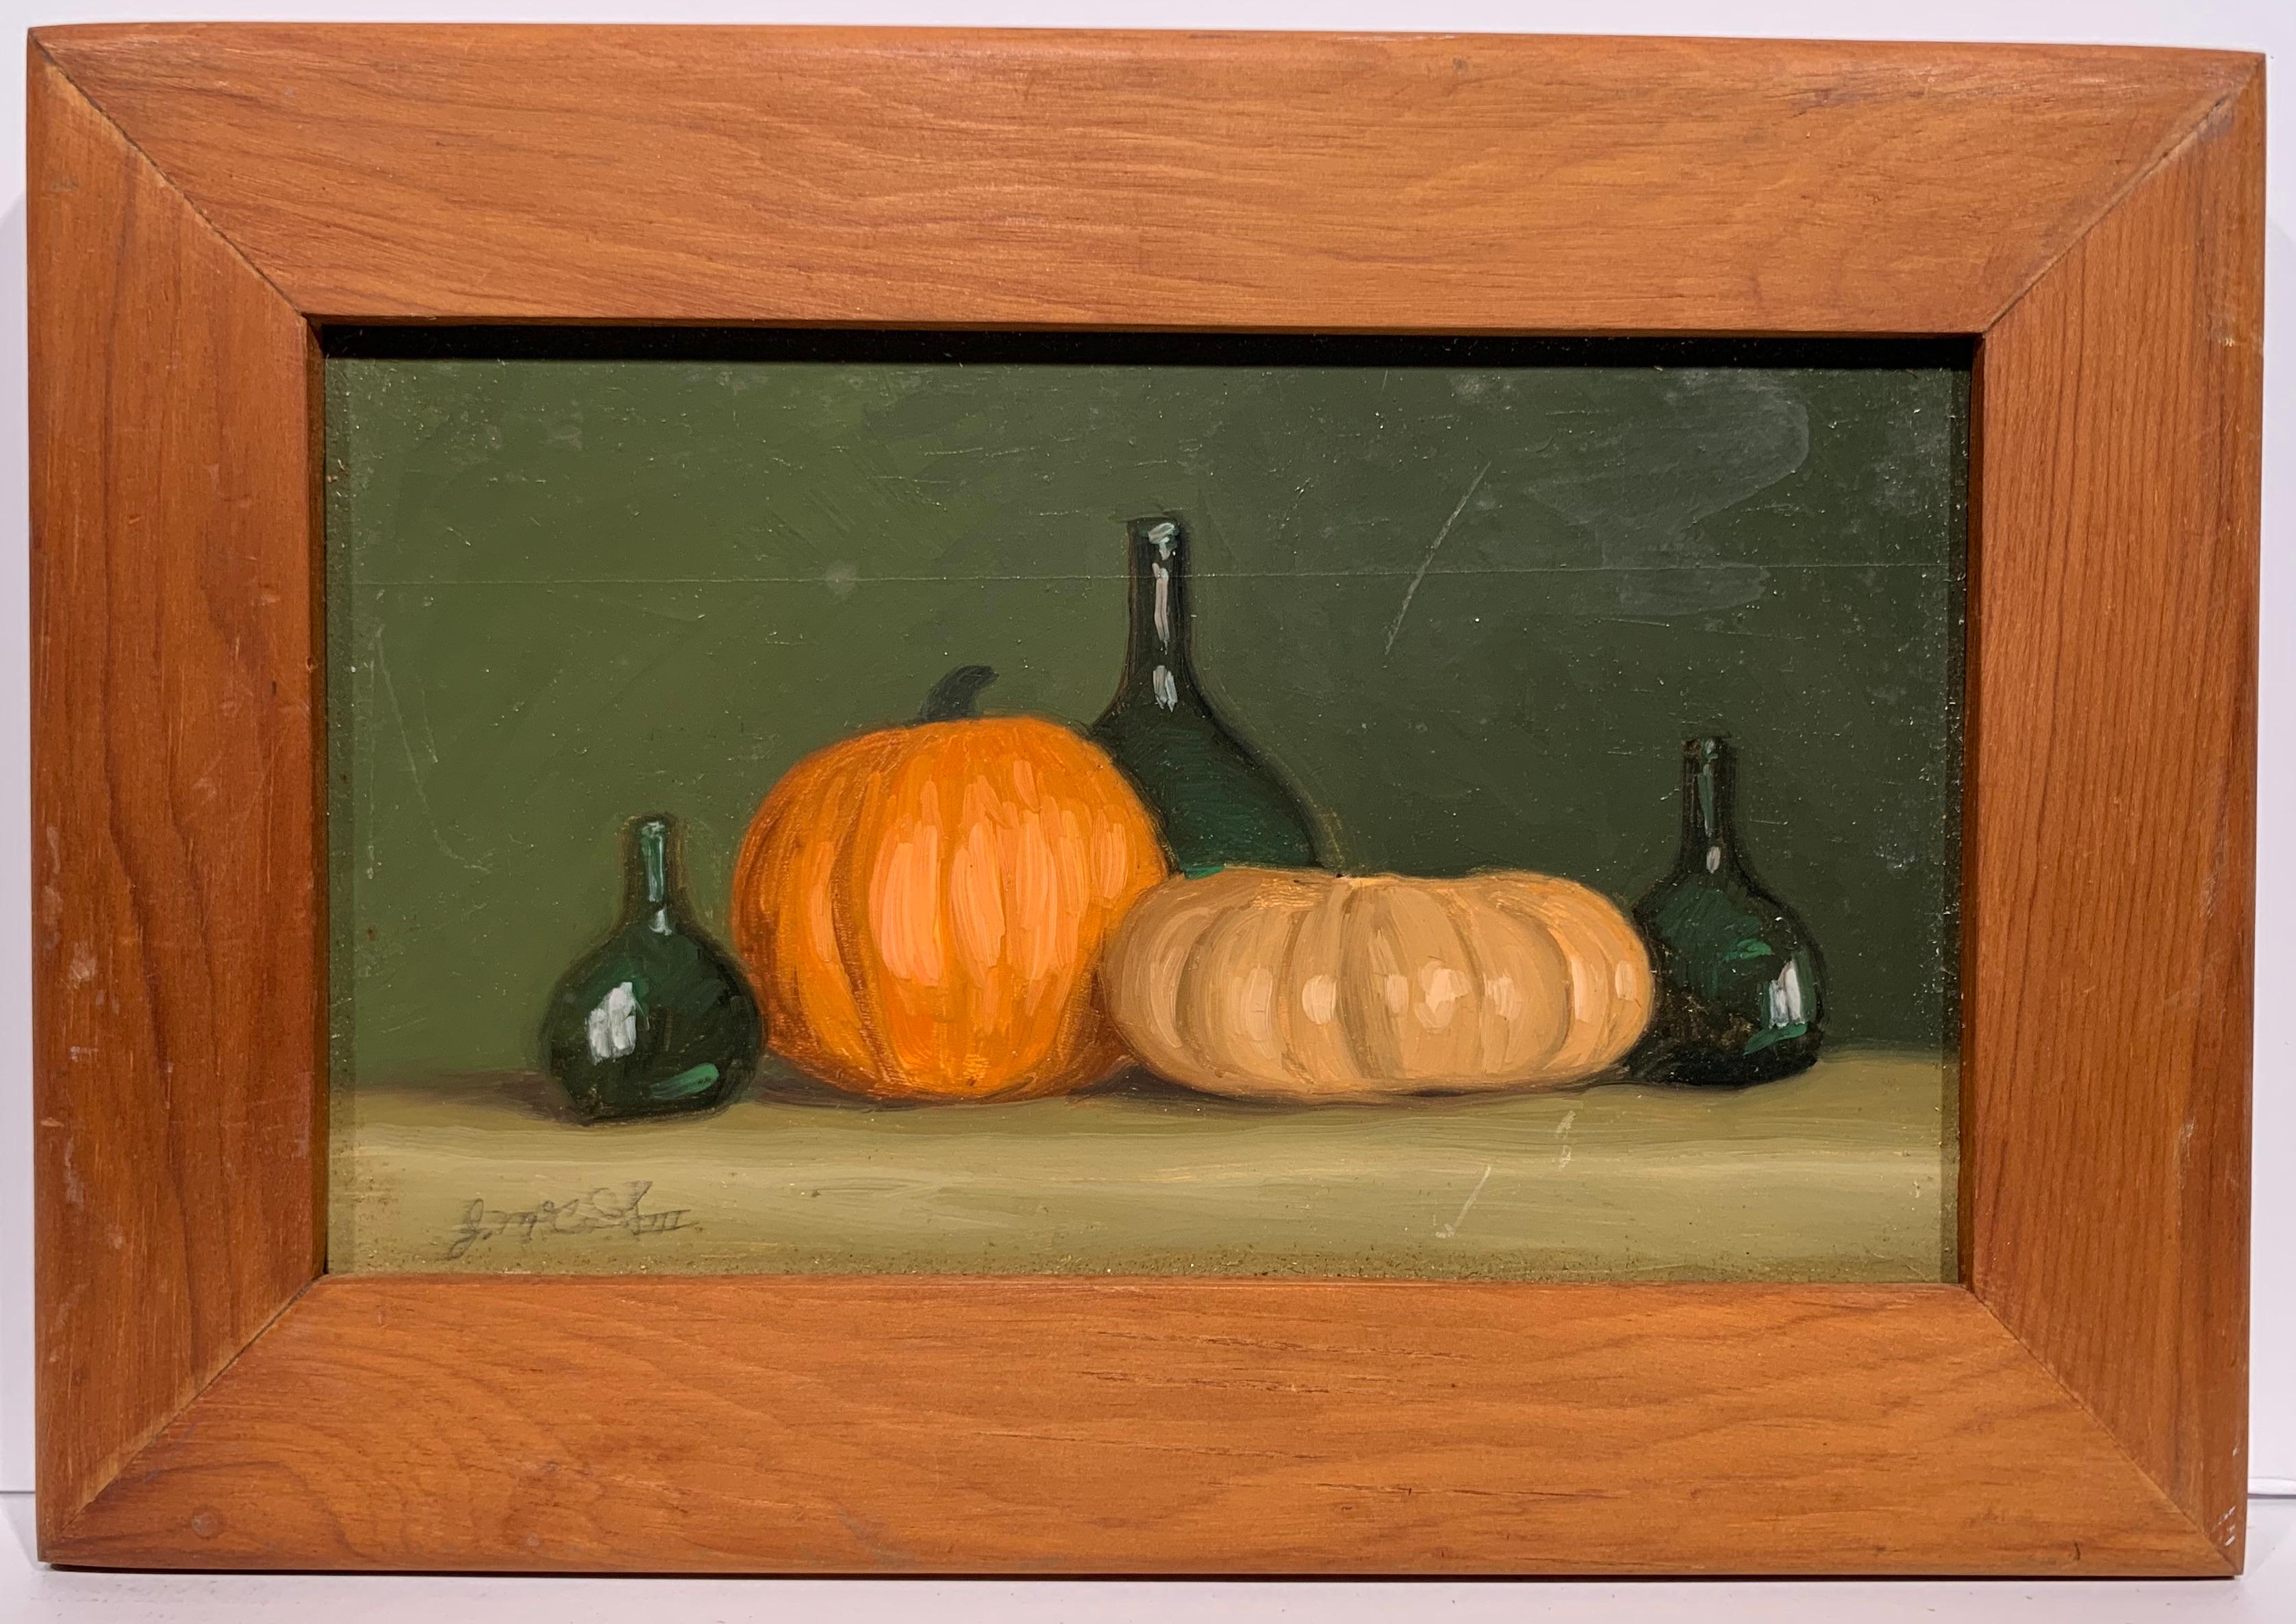 Romantic Autumn Collection (still life painting) - Painting by John McCormick